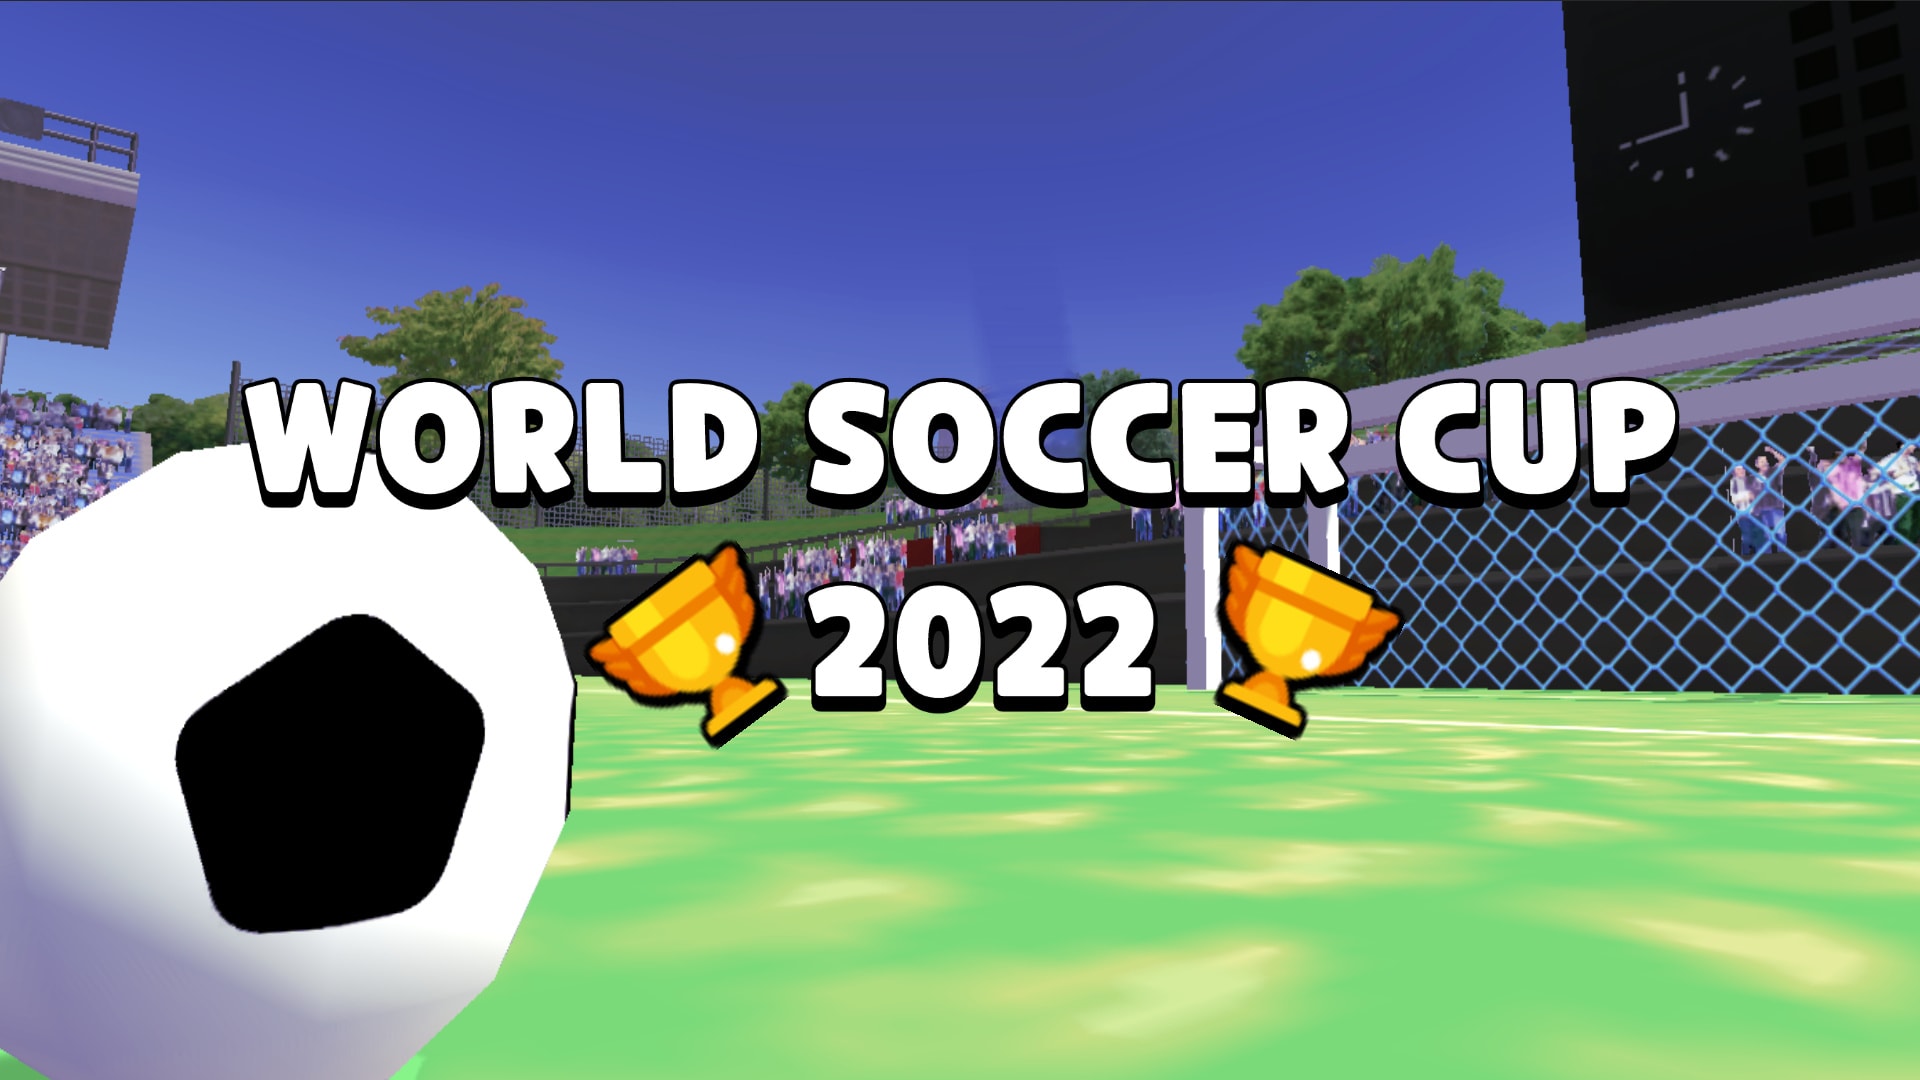 World Soccer Cup 2022